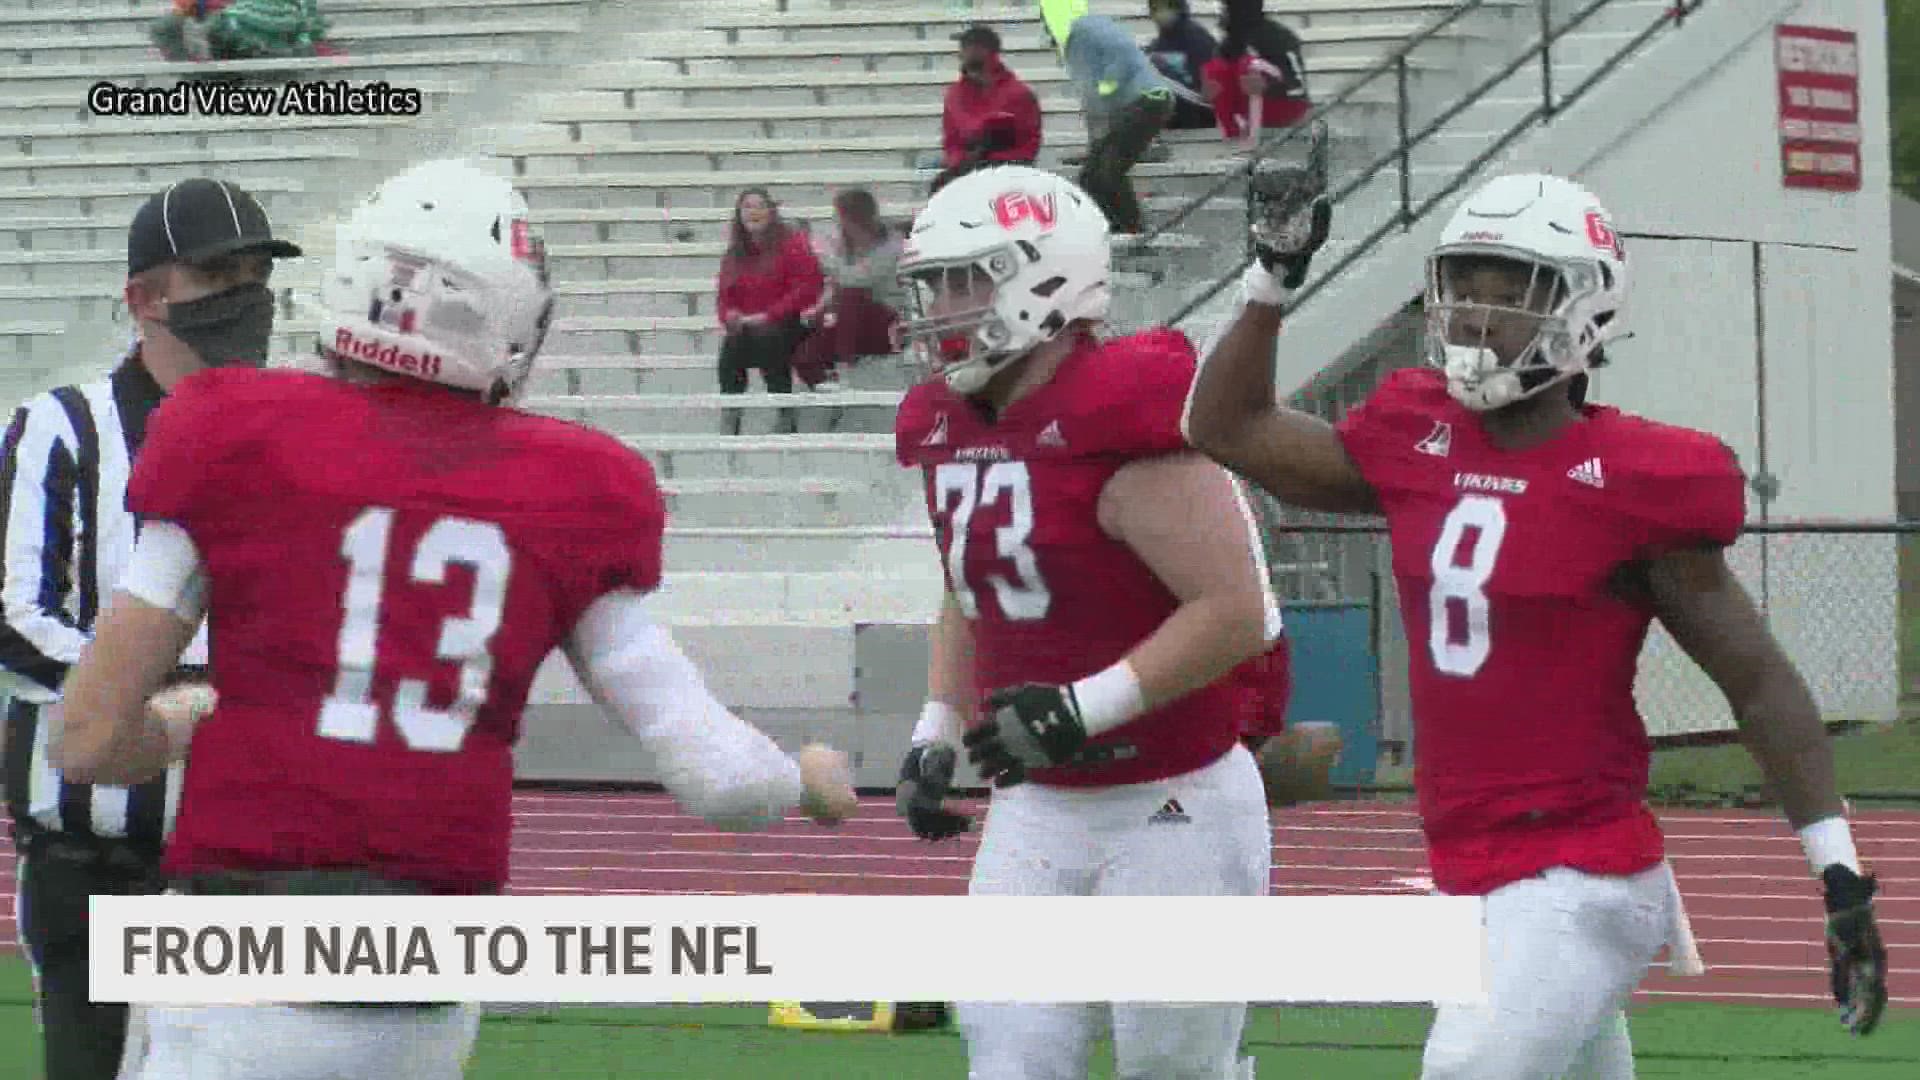 Despite going undrafted, the NFL dream is still alive for three grand view players.